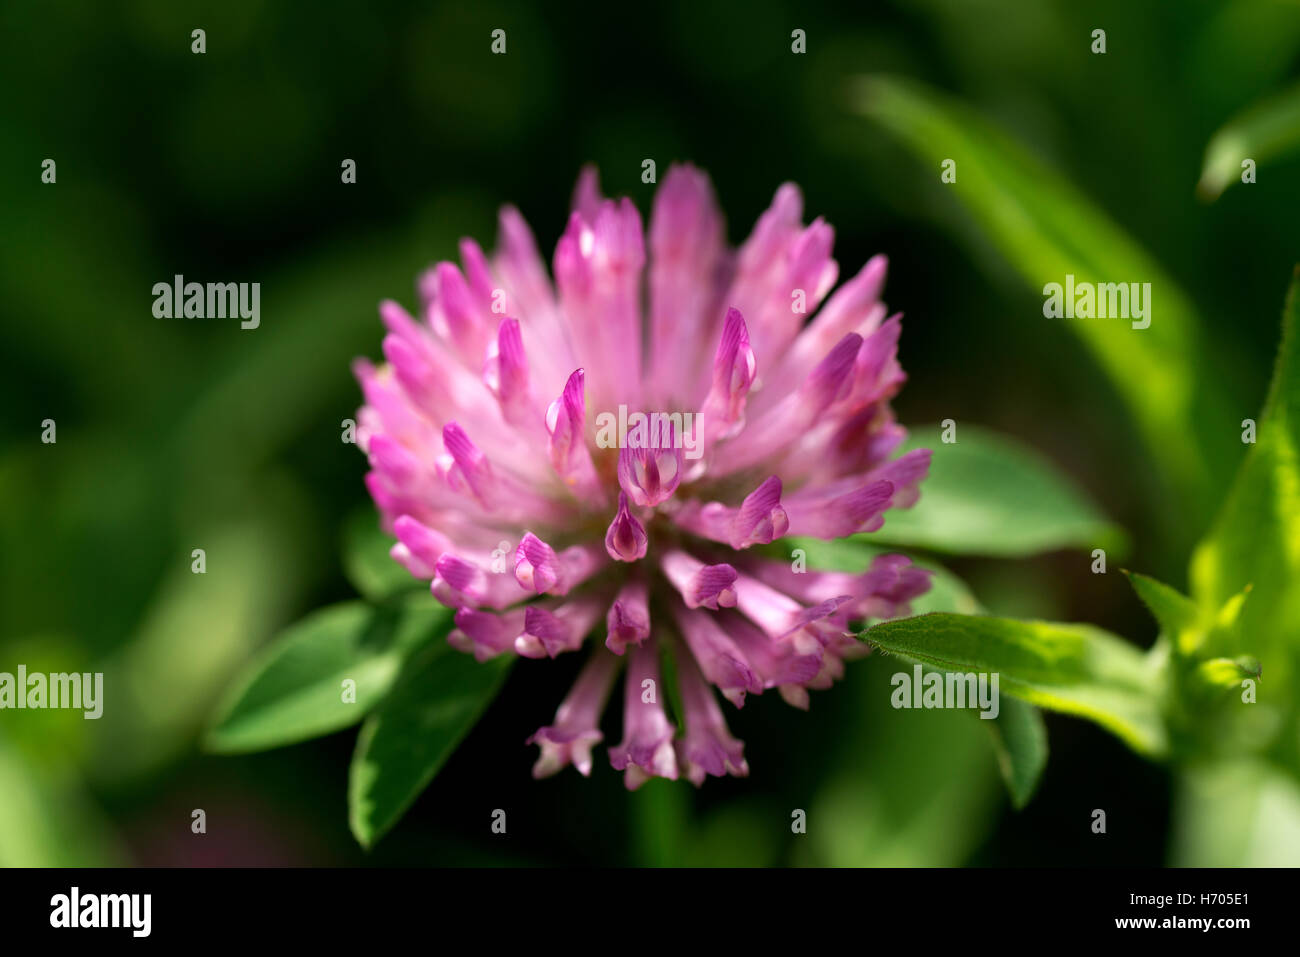 Colorful flowers and clarity Stock Photo